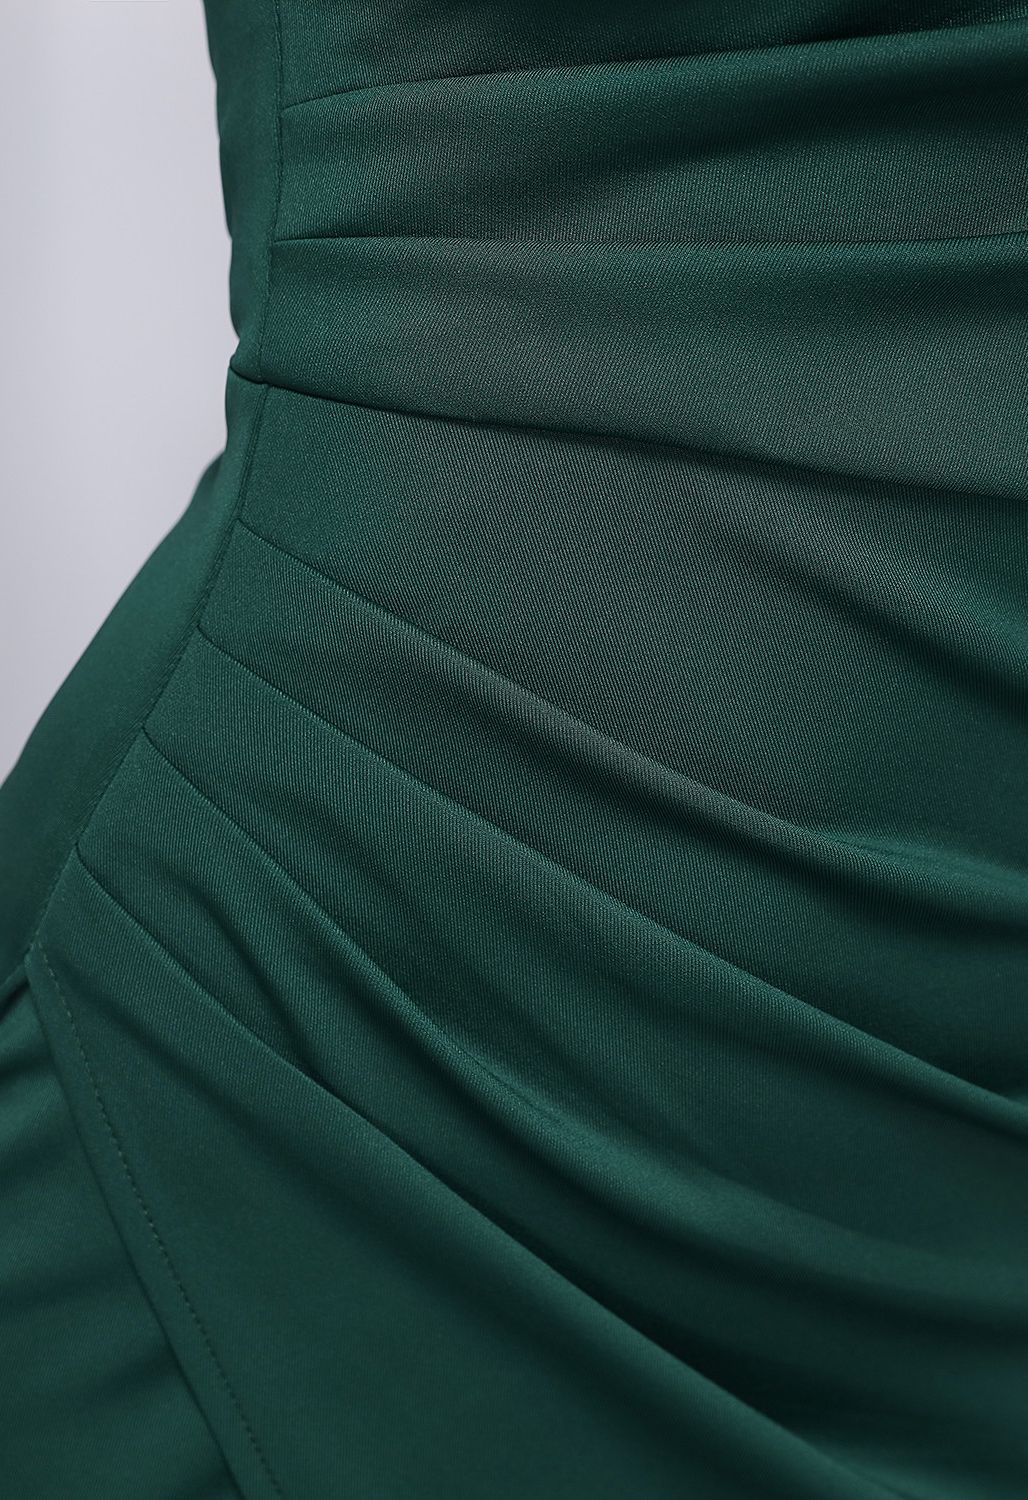 Single Strap Front Slit Gown in Emerald